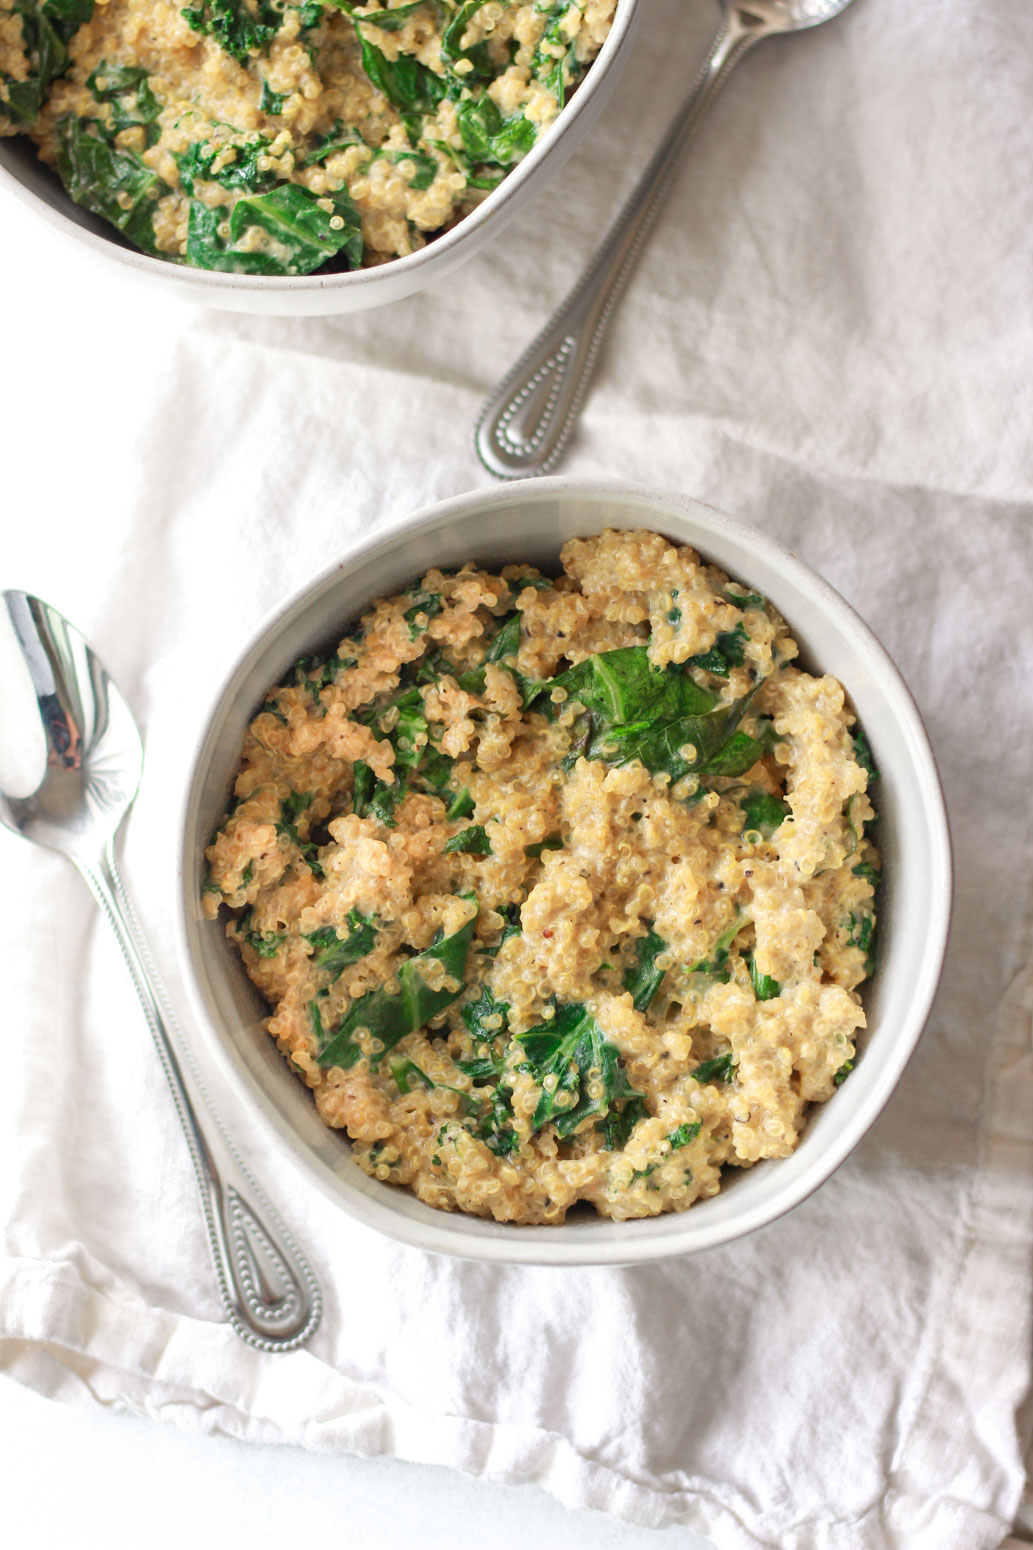 This savory, creamy quinoa and greens is a versatile side dish, but also filling enough to be a main. Coconut milk adds creaminess to this flavorful savory quinoa dish. This creamy coconut quinoa and greens is packed with umami flavor and protein!